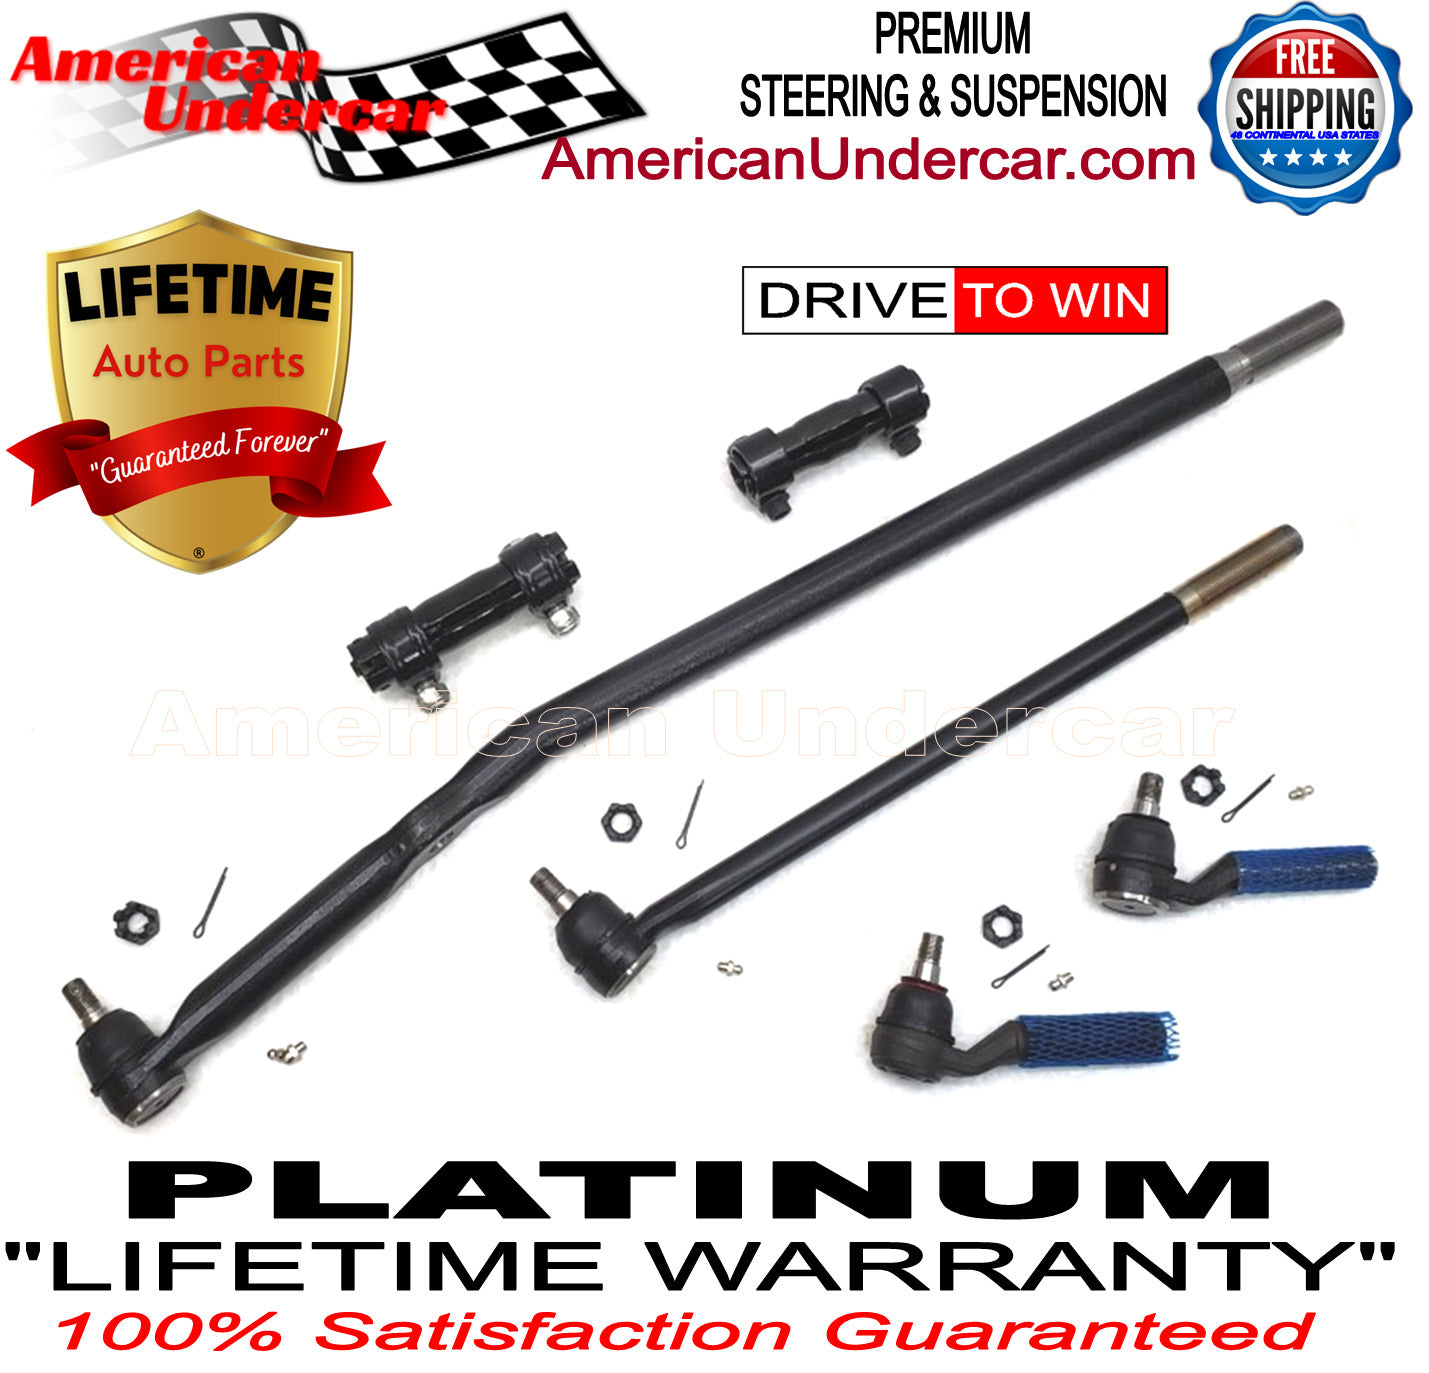 Lifetime Ball Joint Tie Rod Drag Link Steering Kit for 1995-1996 Ford F250 4x4 3850lb Axle